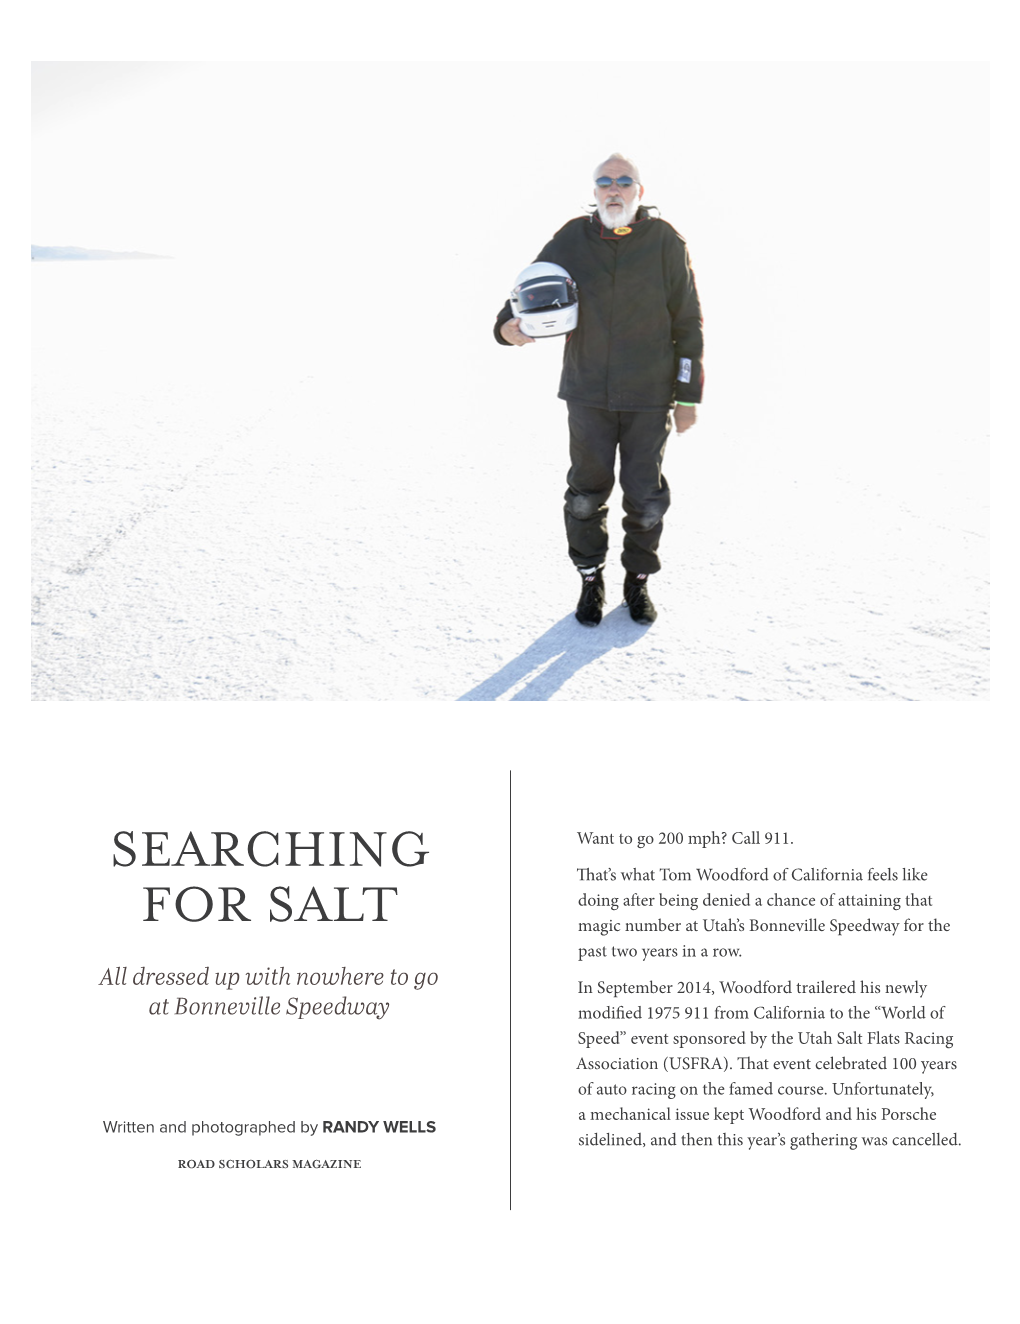 Searching for Salt